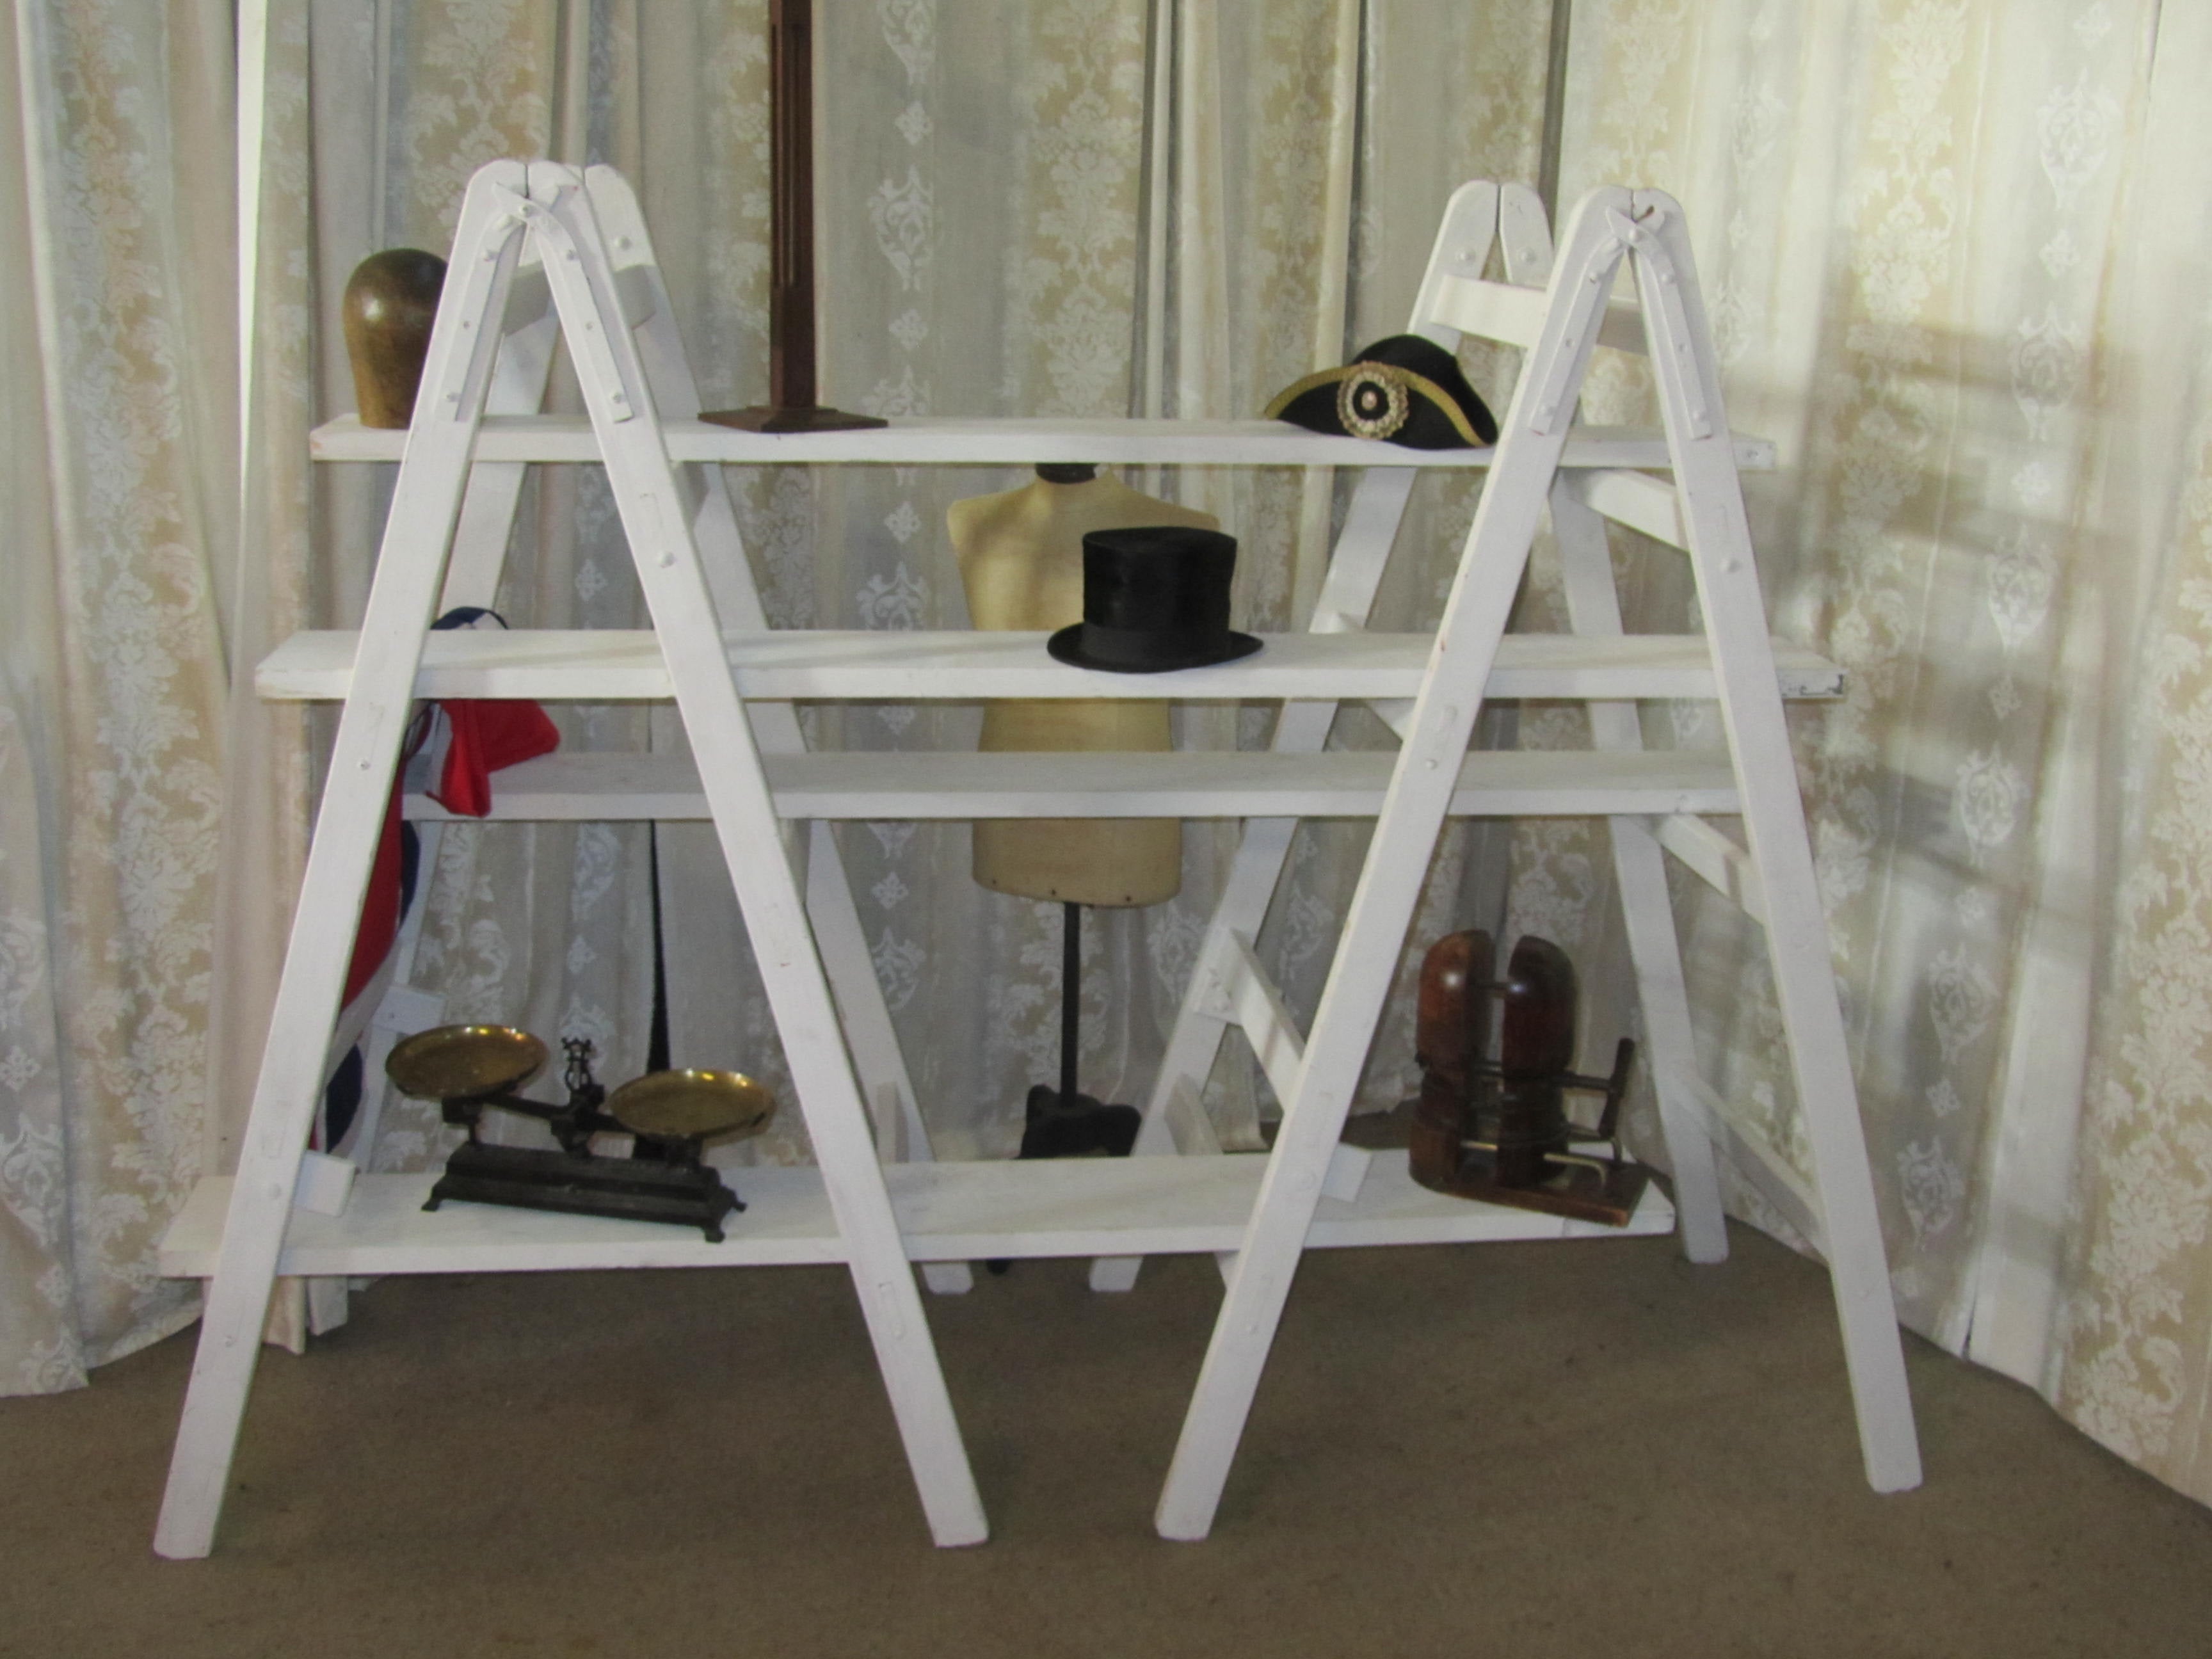 6ft Tall Shabby Painted Pair of Builder’s Trestles 
 
The Trestles come with long heavy boards, ideal for adjustable shop or any other display
 The Trestles have been roughly painted, the boards are a modern addition and have been painted to match,